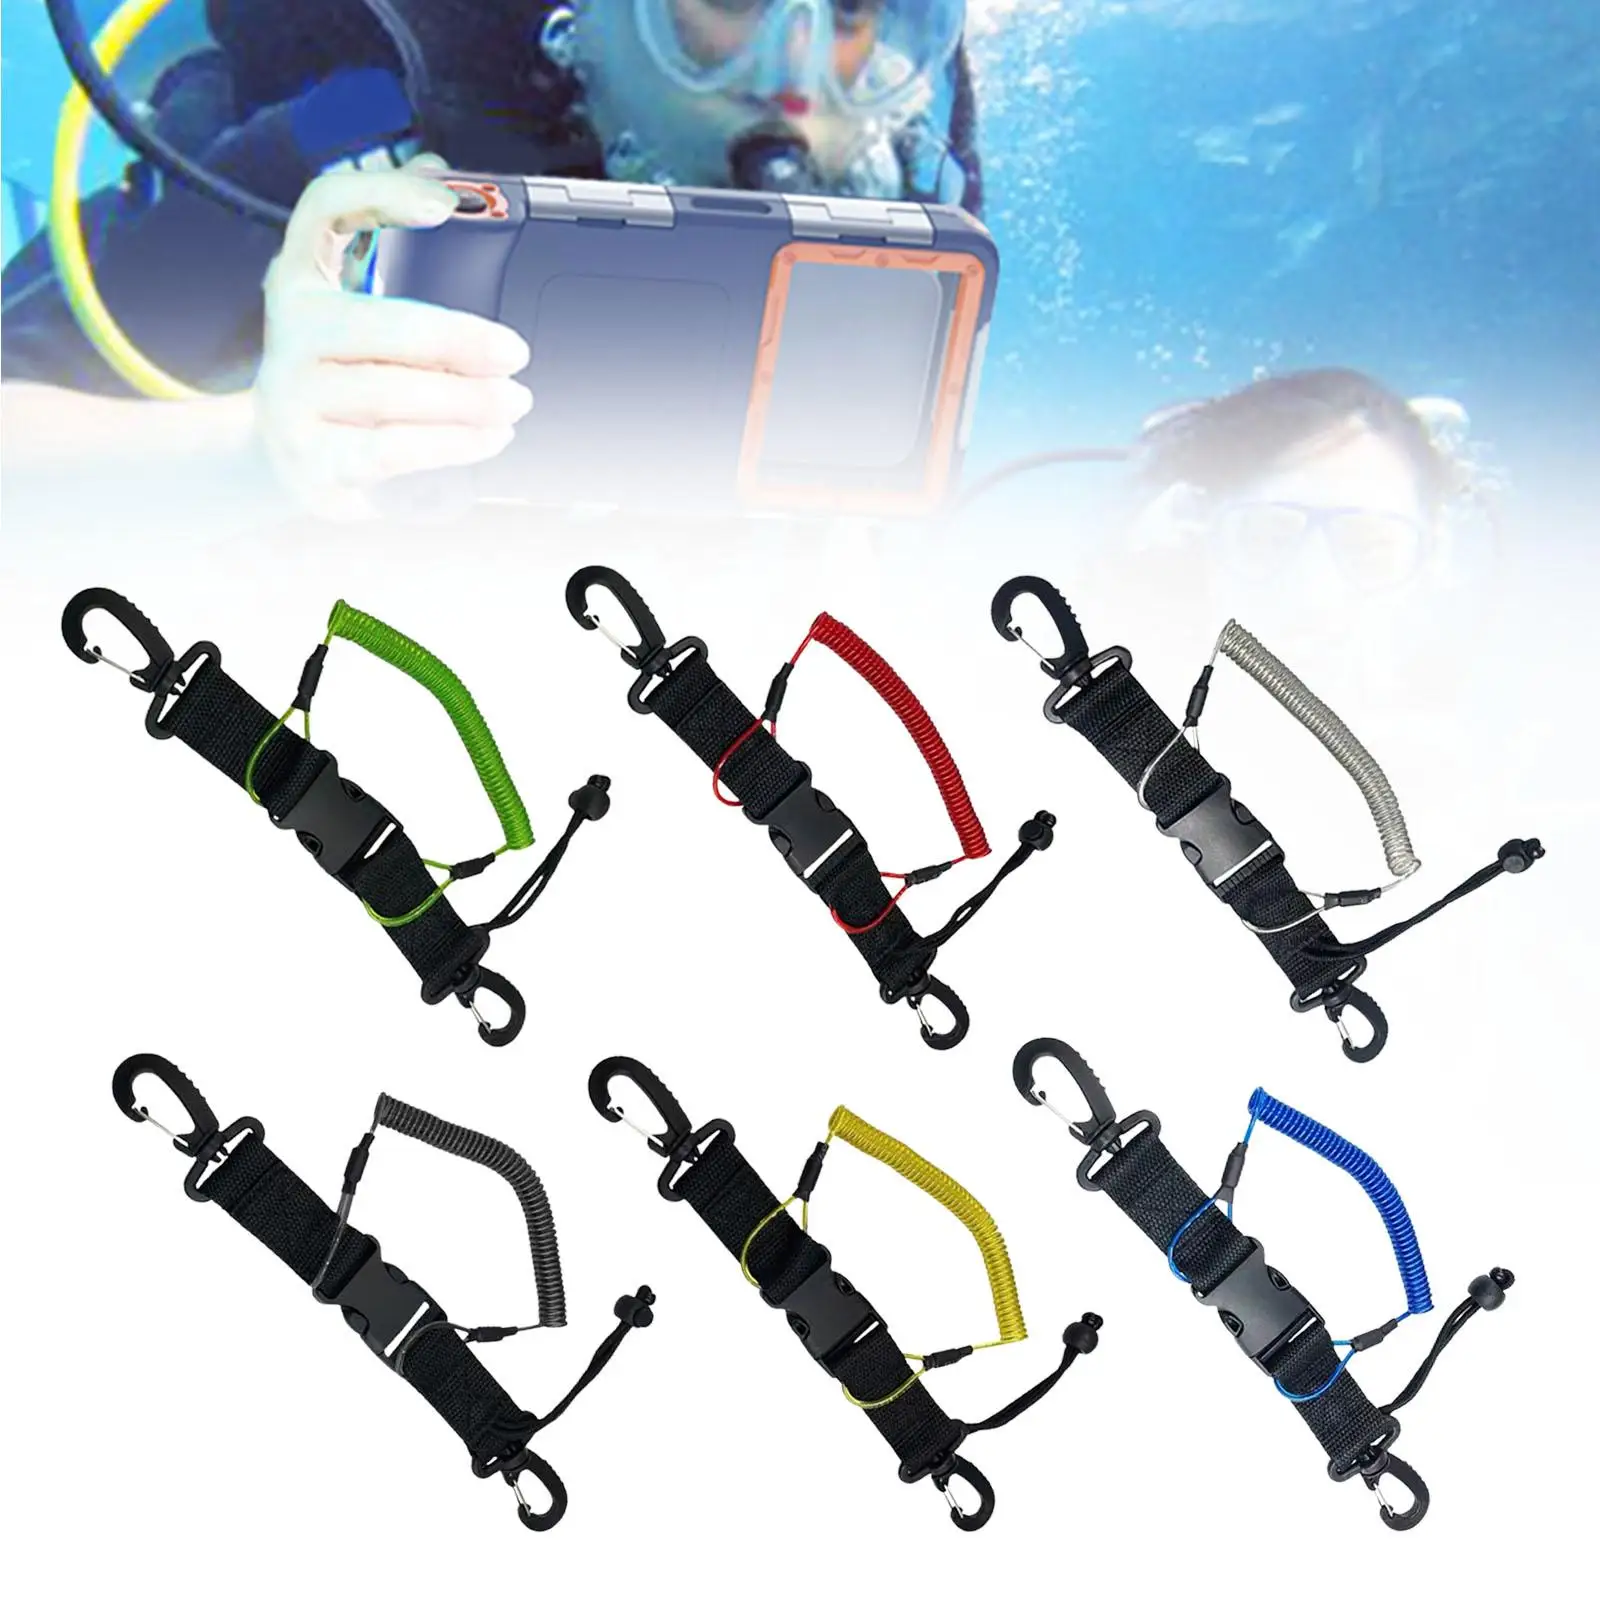 Diving Lanyard Anti Lost Portable Lightweight Freediving Lanyard Rope for Diving Snorkeling Underwater Under Water Sports Lights